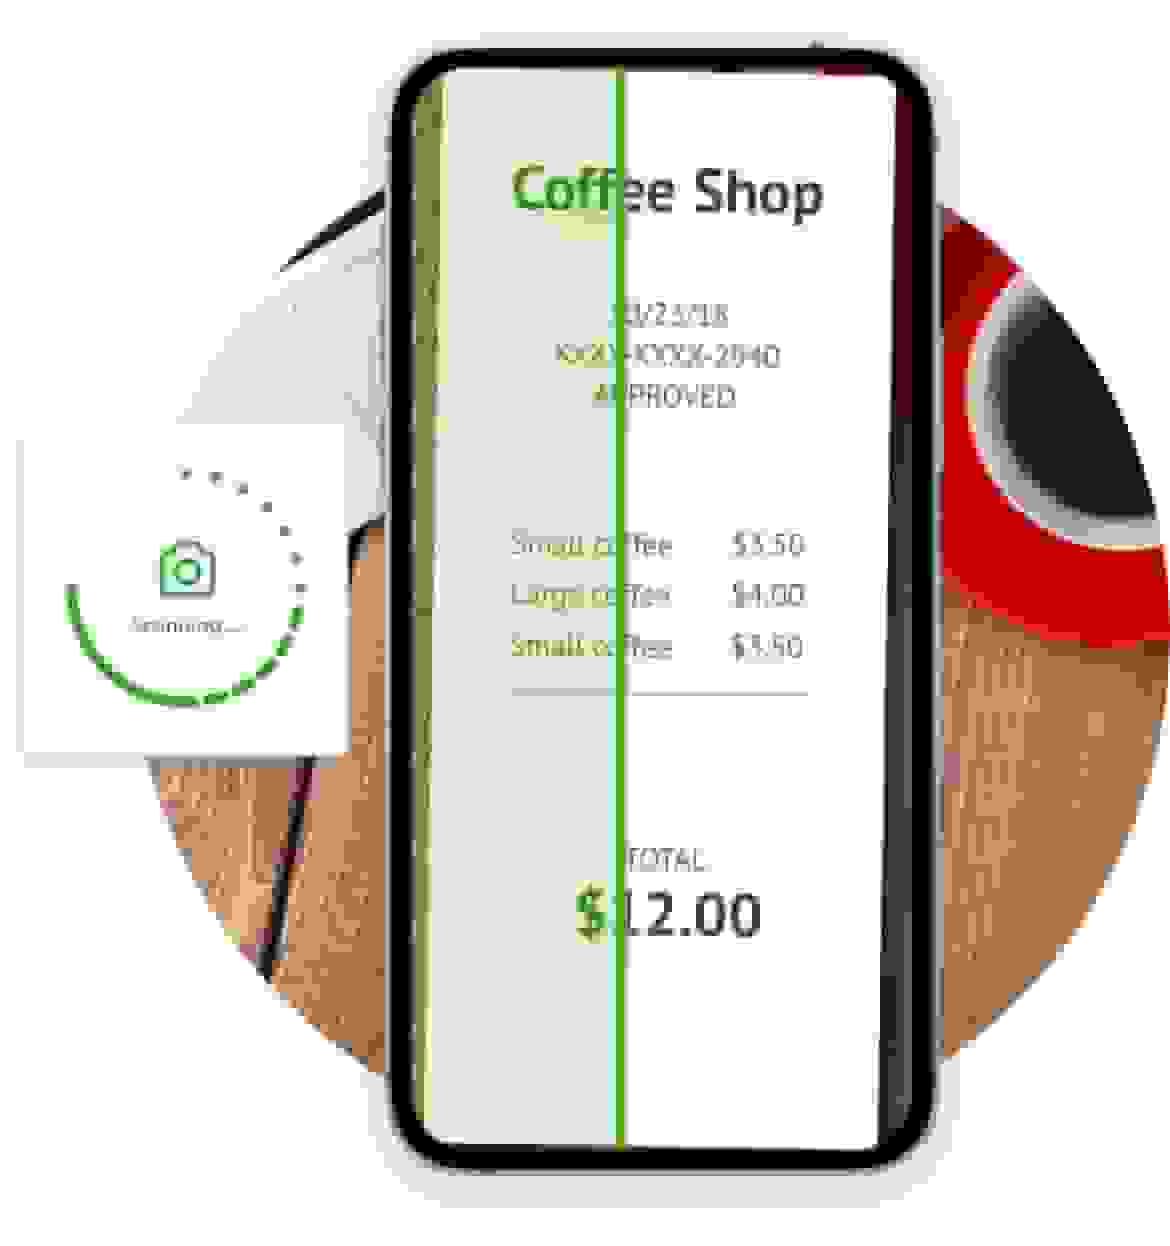 A digital wallet attached to a mobile device.